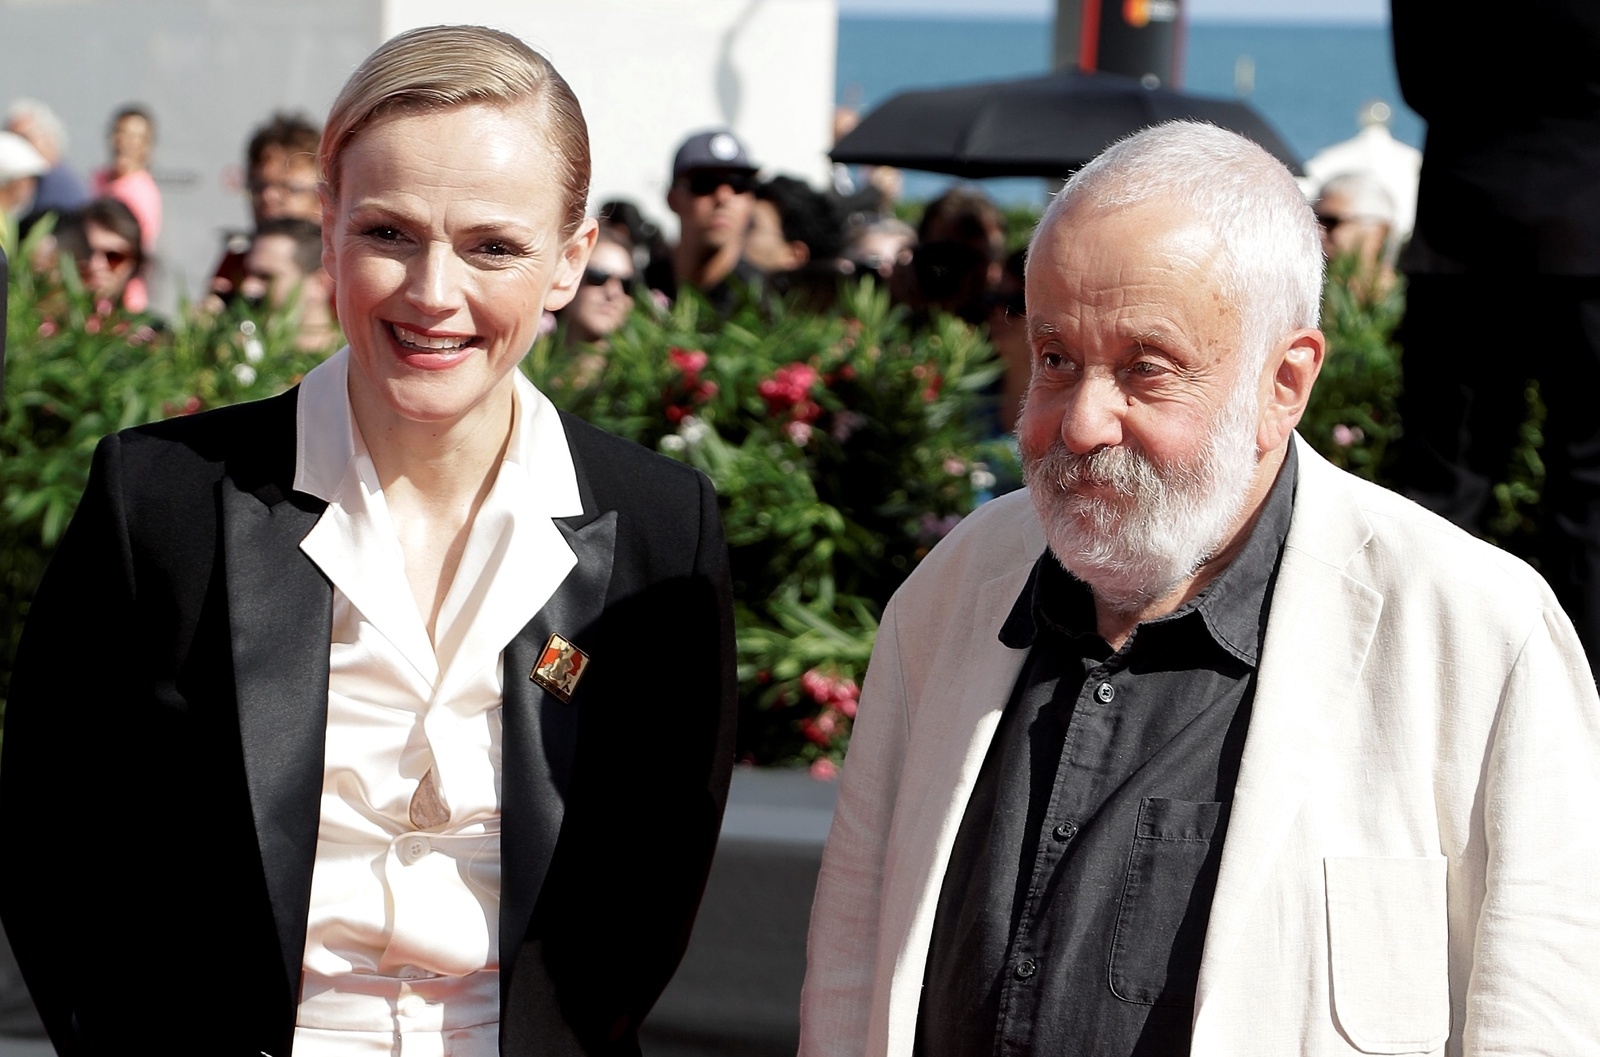 Actress Maxine Peake and director Mike Leigh pose for photographers upon arrival at the premiere for the film ’Peterloo’ at the 75th edition of the Venice Film Festival in Venice, Italy, Saturday, Sept. 1, 2018. (AP Photo/Kirsty Wigglesworth)